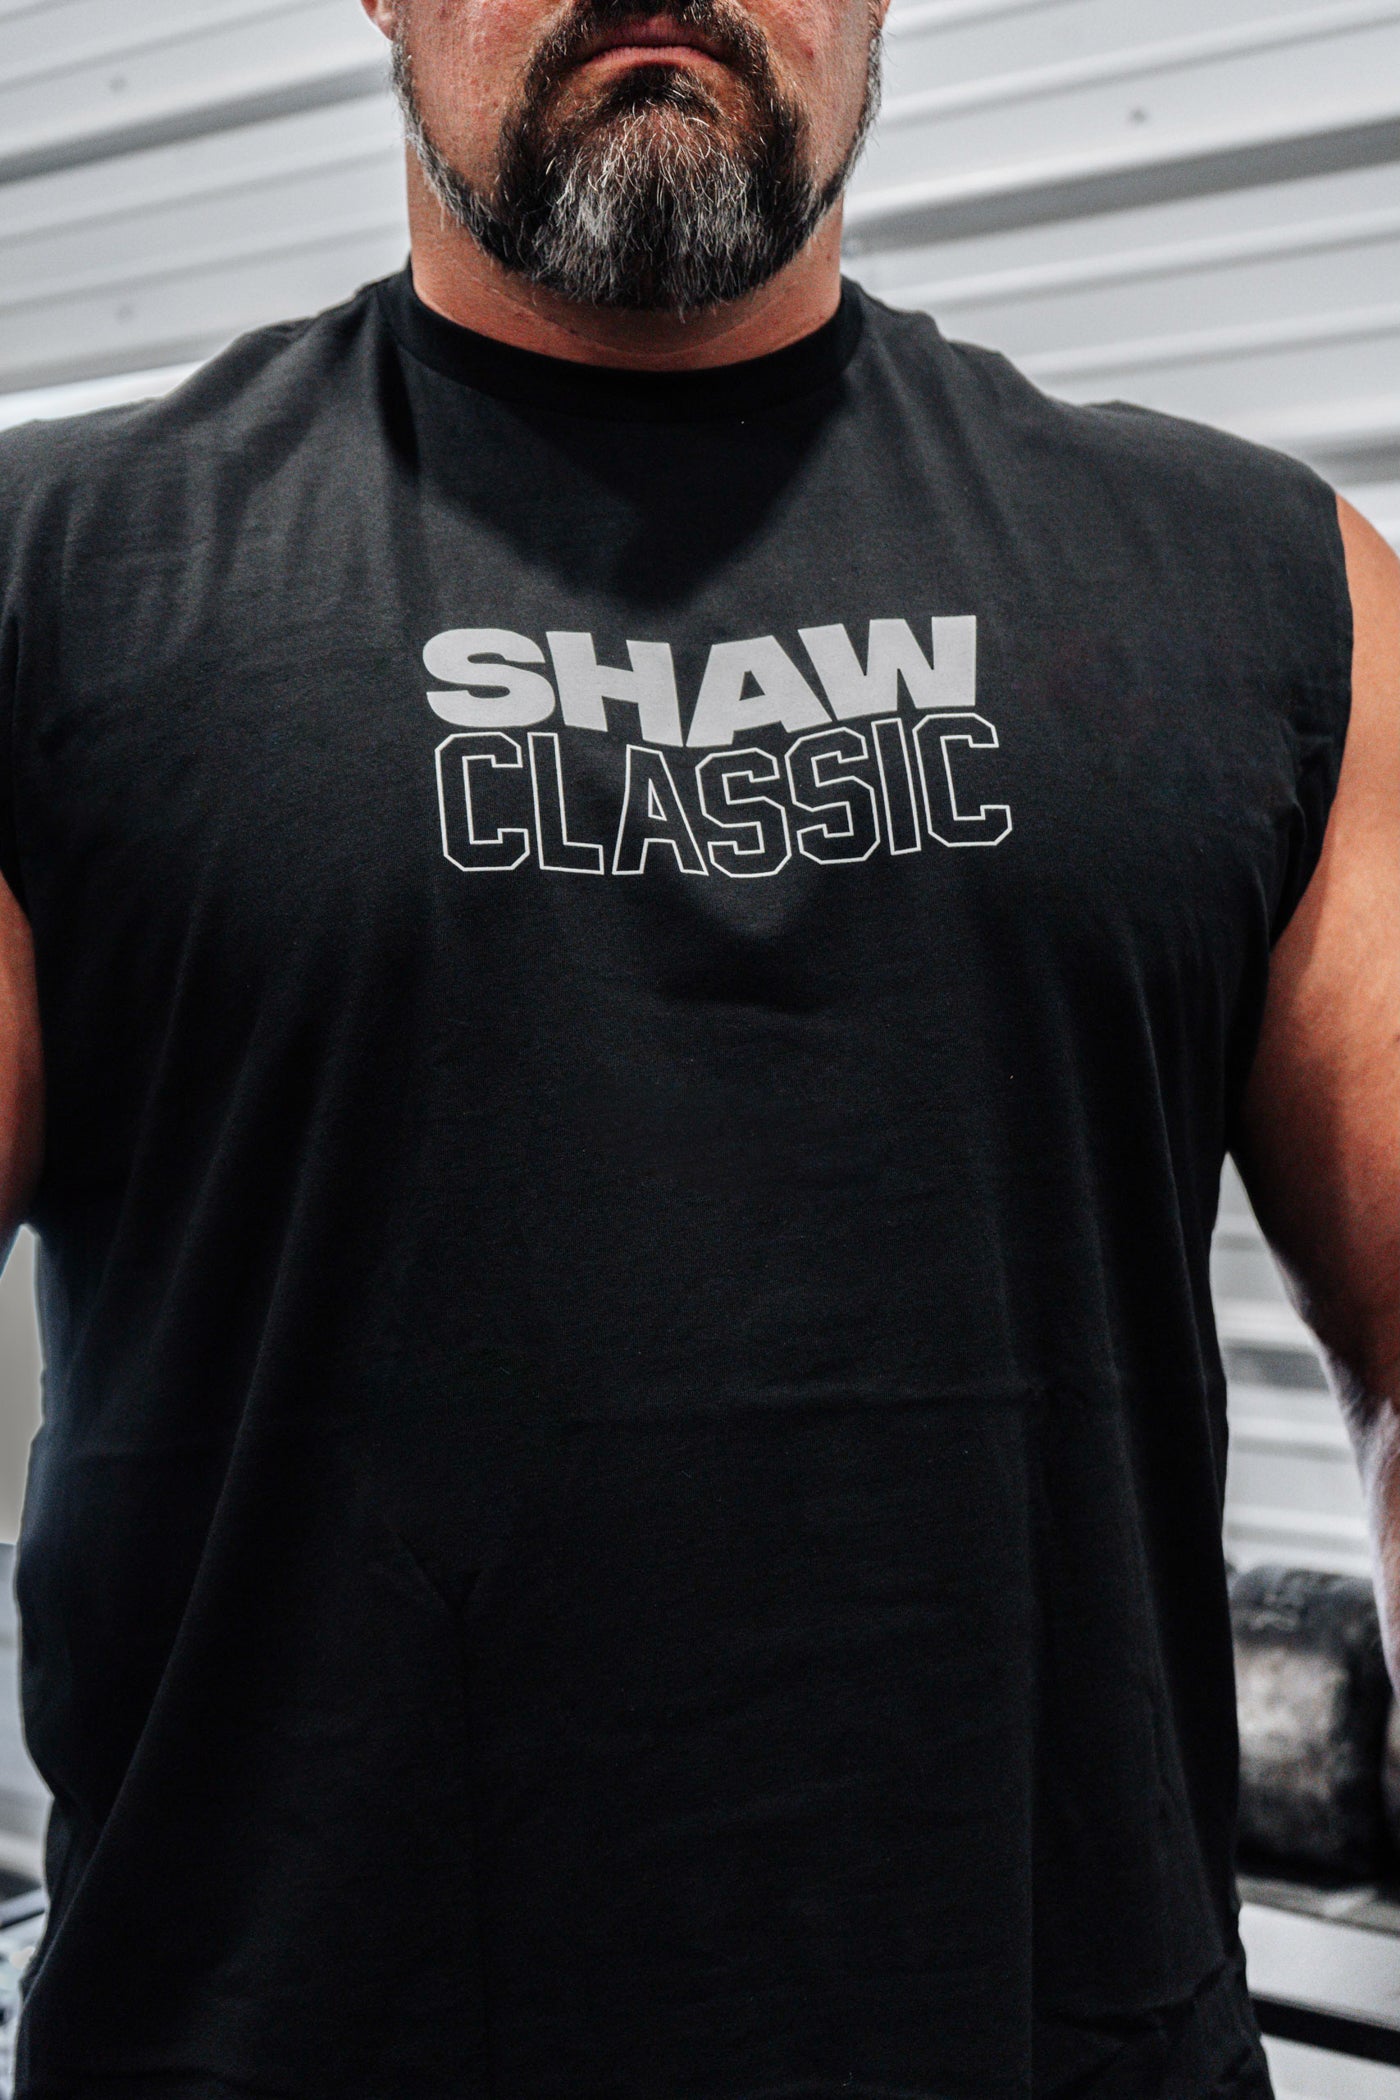 MUSCLE SHAW CLASSIC